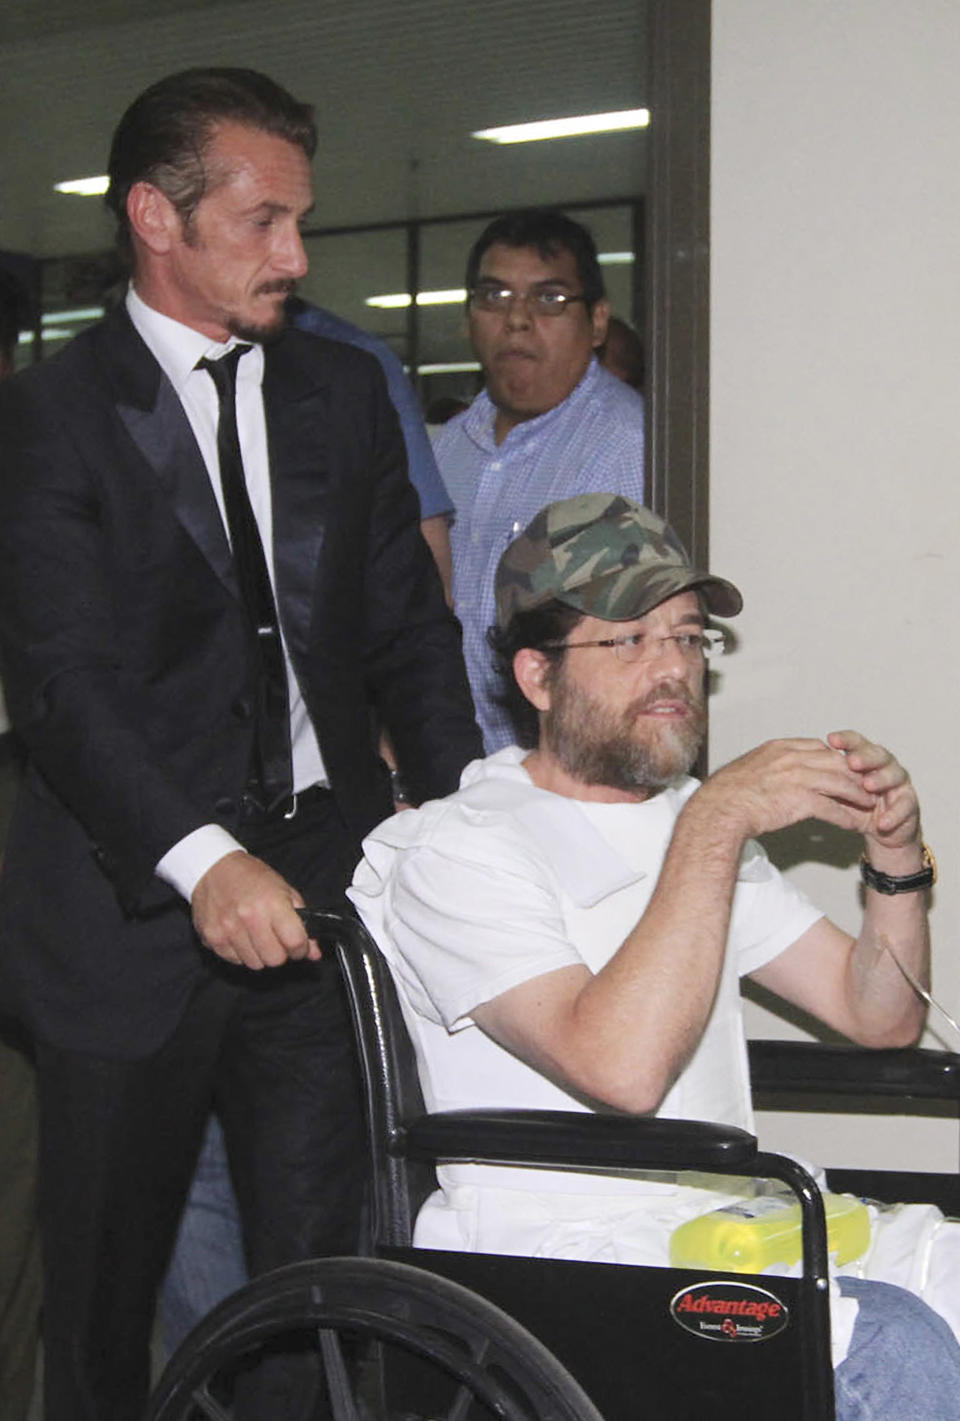 U.S. actor Sean Penn pushes U.S. businessman Jacob Ostreicher in a wheelchair, wearing a flak jacket, during a recess at Ostreicher's hearing in Santa Cruz, Bolivia, Tuesday, Dec. 11, 2012. A Bolivian appeals panel has refused to immediately release Ostreicher, despite evidence he was fleeced and extorted by prosecutors who have had him jailed for 18 months without charges on suspicion of money laundering. Ostreicher has been hospitalized for more than two weeks in a private clinic after being diagnosed with Parkinson's. Ostreicher's case led to the uncovering of a shakedown ring allegedly run by the No. 1 legal advisor in the Interior Ministry, and including two prosecutors. It came after actor Sean Pean interceded with President Evo Morales. (AP Photo)